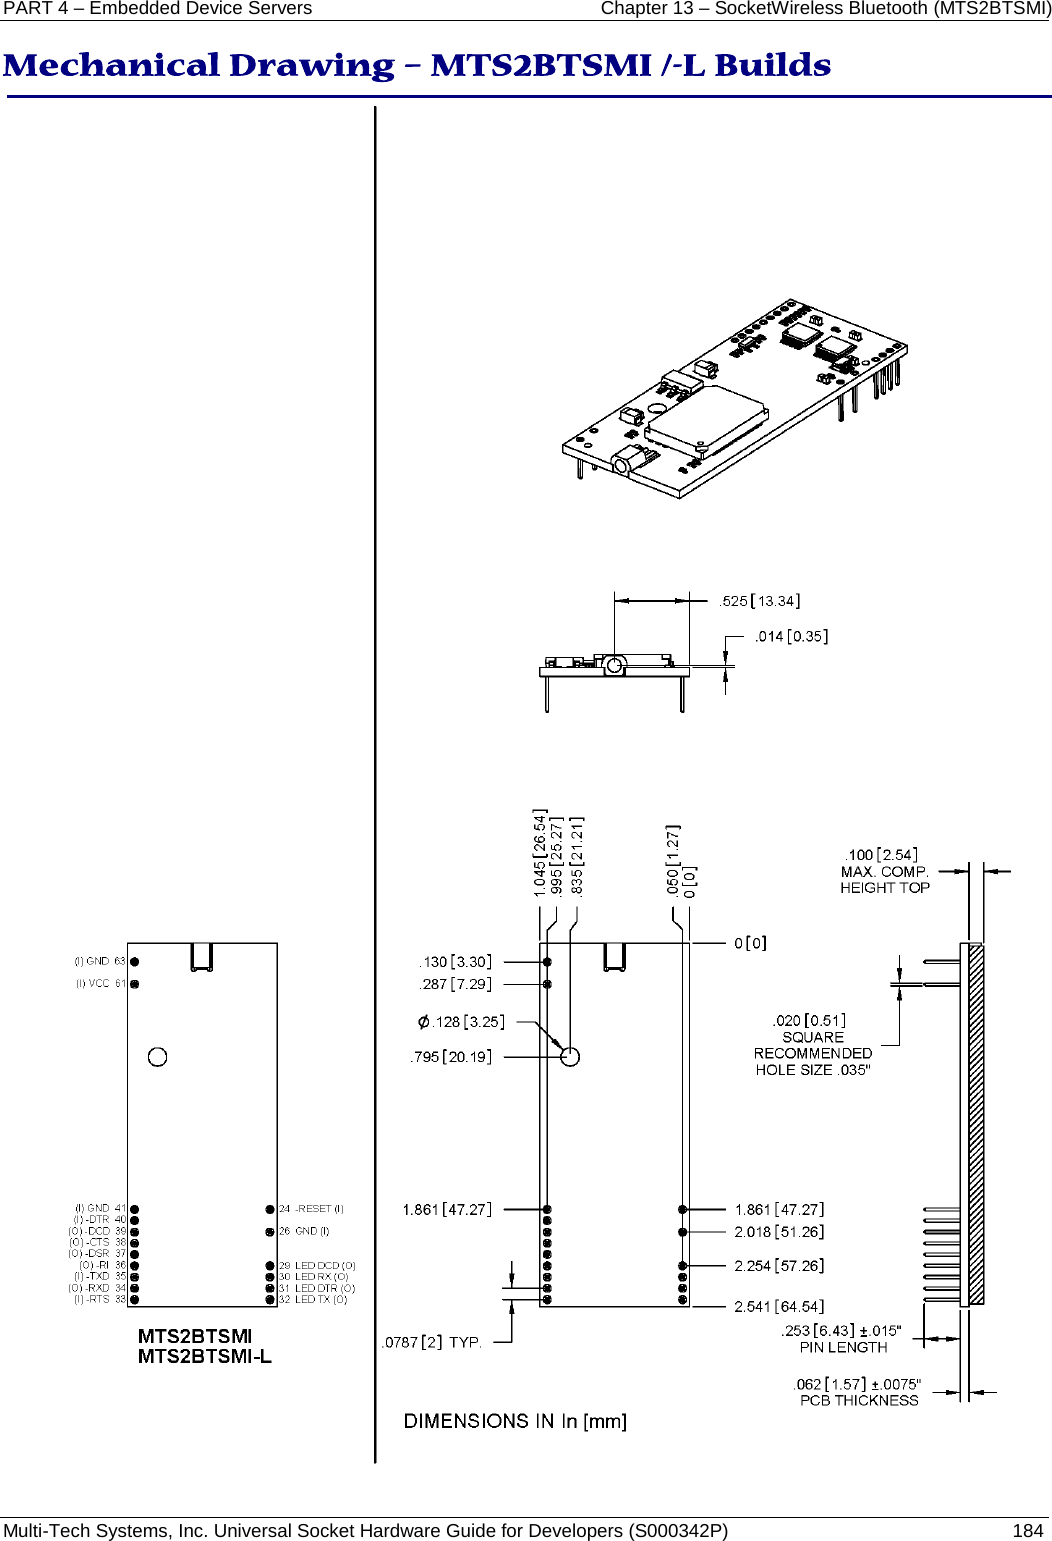 PART 4 – Embedded Device Servers Chapter 13 – SocketWireless Bluetooth (MTS2BTSMI) Multi-Tech Systems, Inc. Universal Socket Hardware Guide for Developers (S000342P)  184   Mechanical Drawing – MTS2BTSMI /-L Builds     